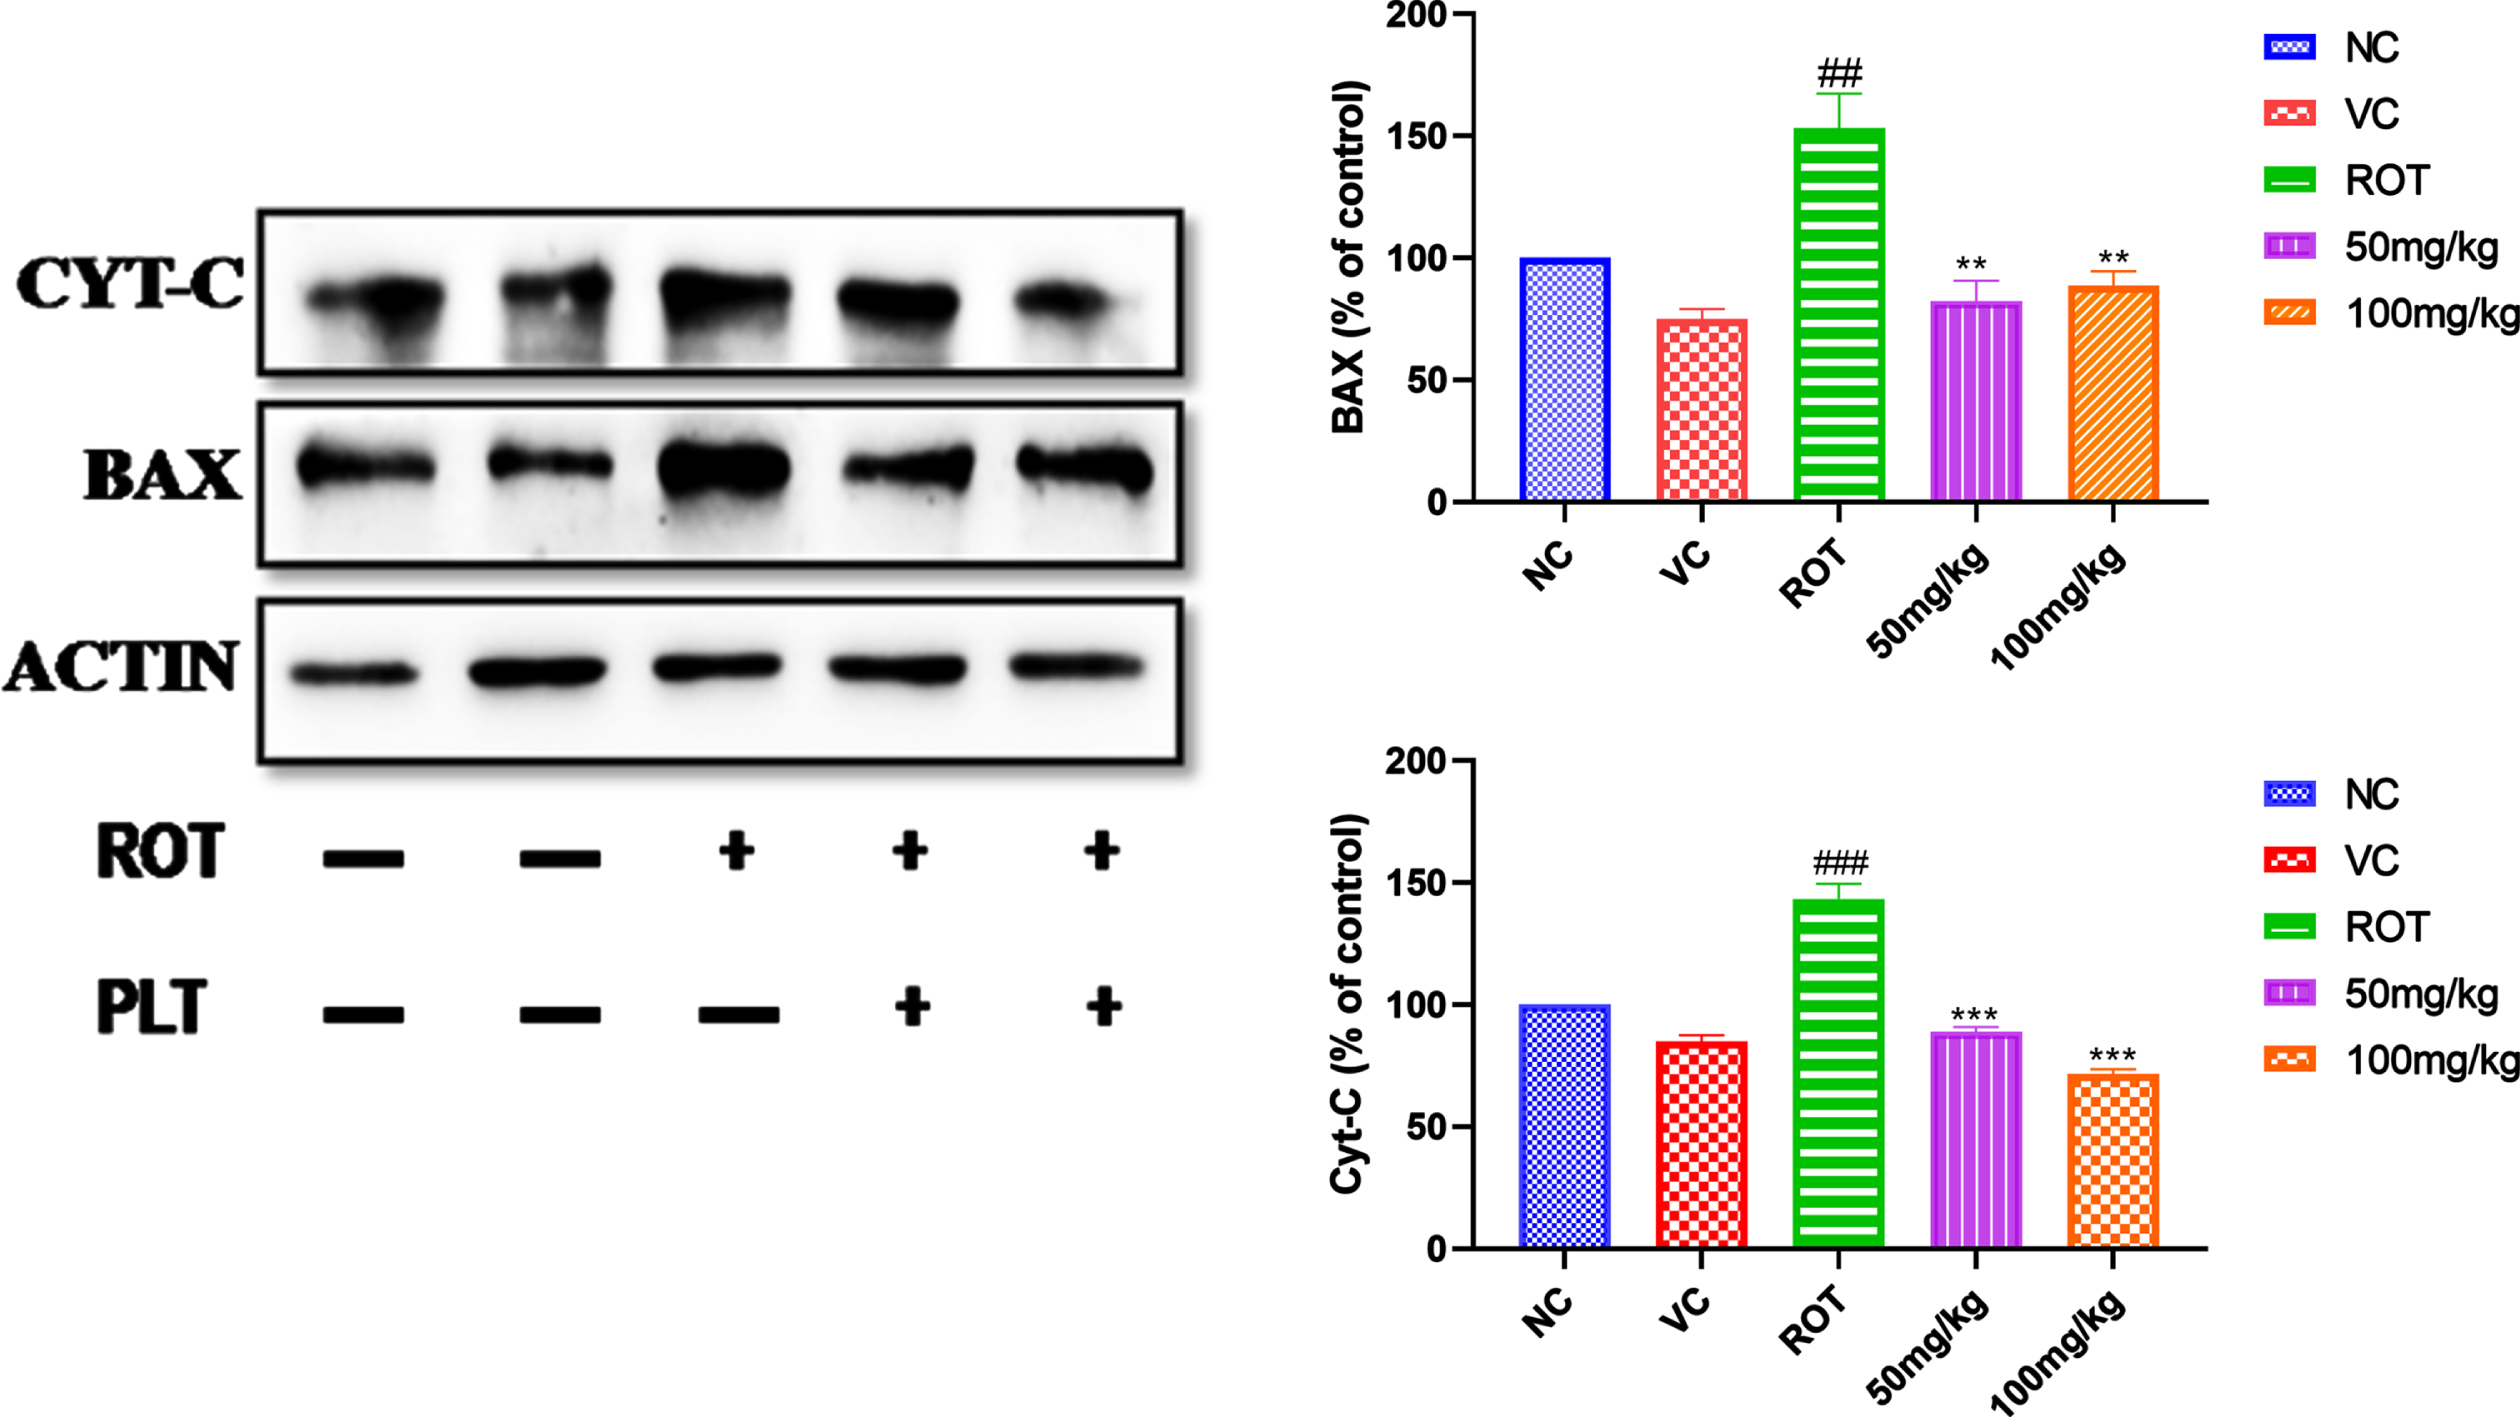 Effect of PLT on apoptotic protein. NC, Normal control rats; VC, Vehicle control; ROT, Disease control. Rot treated with Phloretin at 50 and 100 mg/kg, p.o. respectively. ###p < 0.001 versus NC, *p < 0.05, **p < 0.01, ***p < 0.001 versus ROT. One-way ANOVA was applied to statistical analysis, followed by post hoc analysis by “Bonferroni’s multiple comparison tests”. The results obtained are represented as mean±SEM (n = 3) and results with p < 0.05 were considered statistically significant.